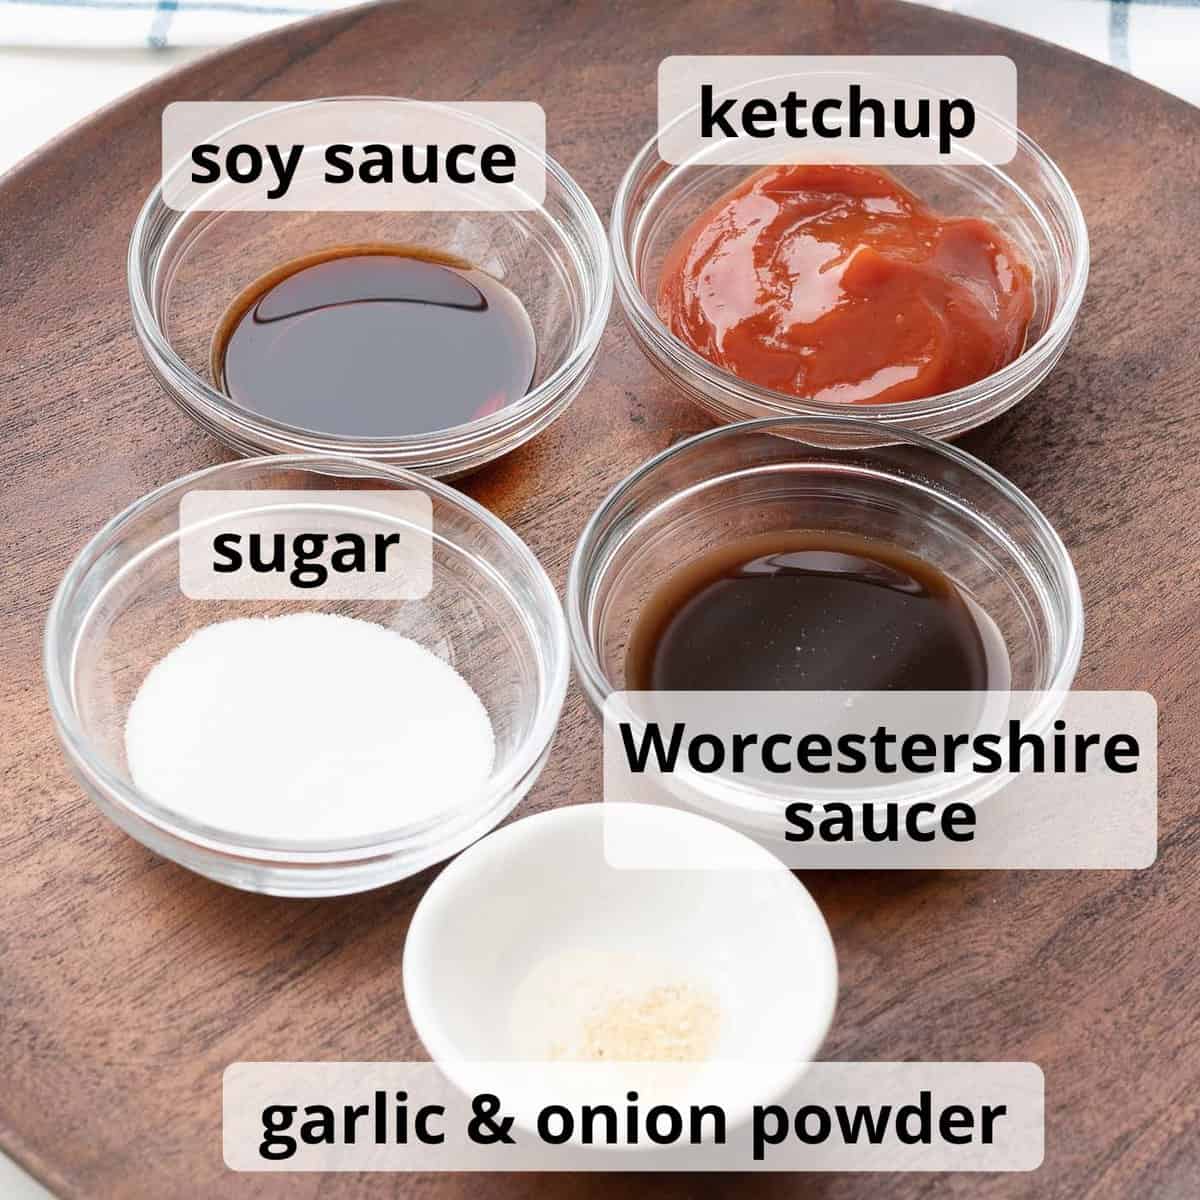 Ingredients for chicken katsu sauce with text labels.